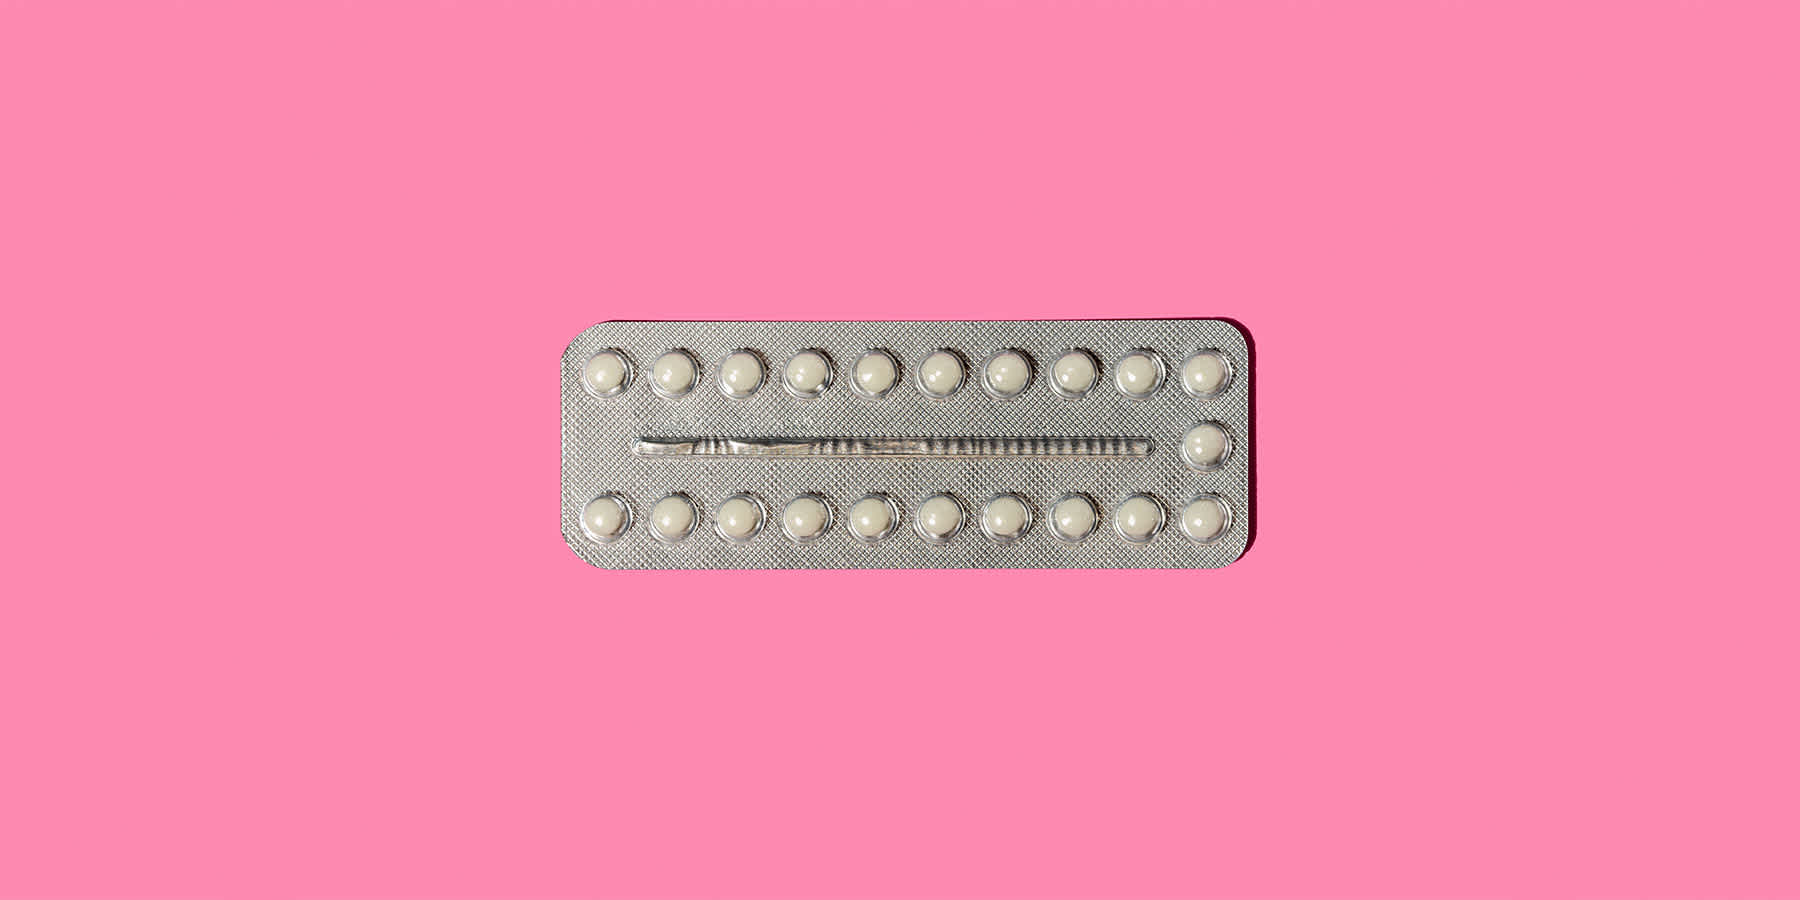 Pack of Zithromax medication for chlamydia against a pink background